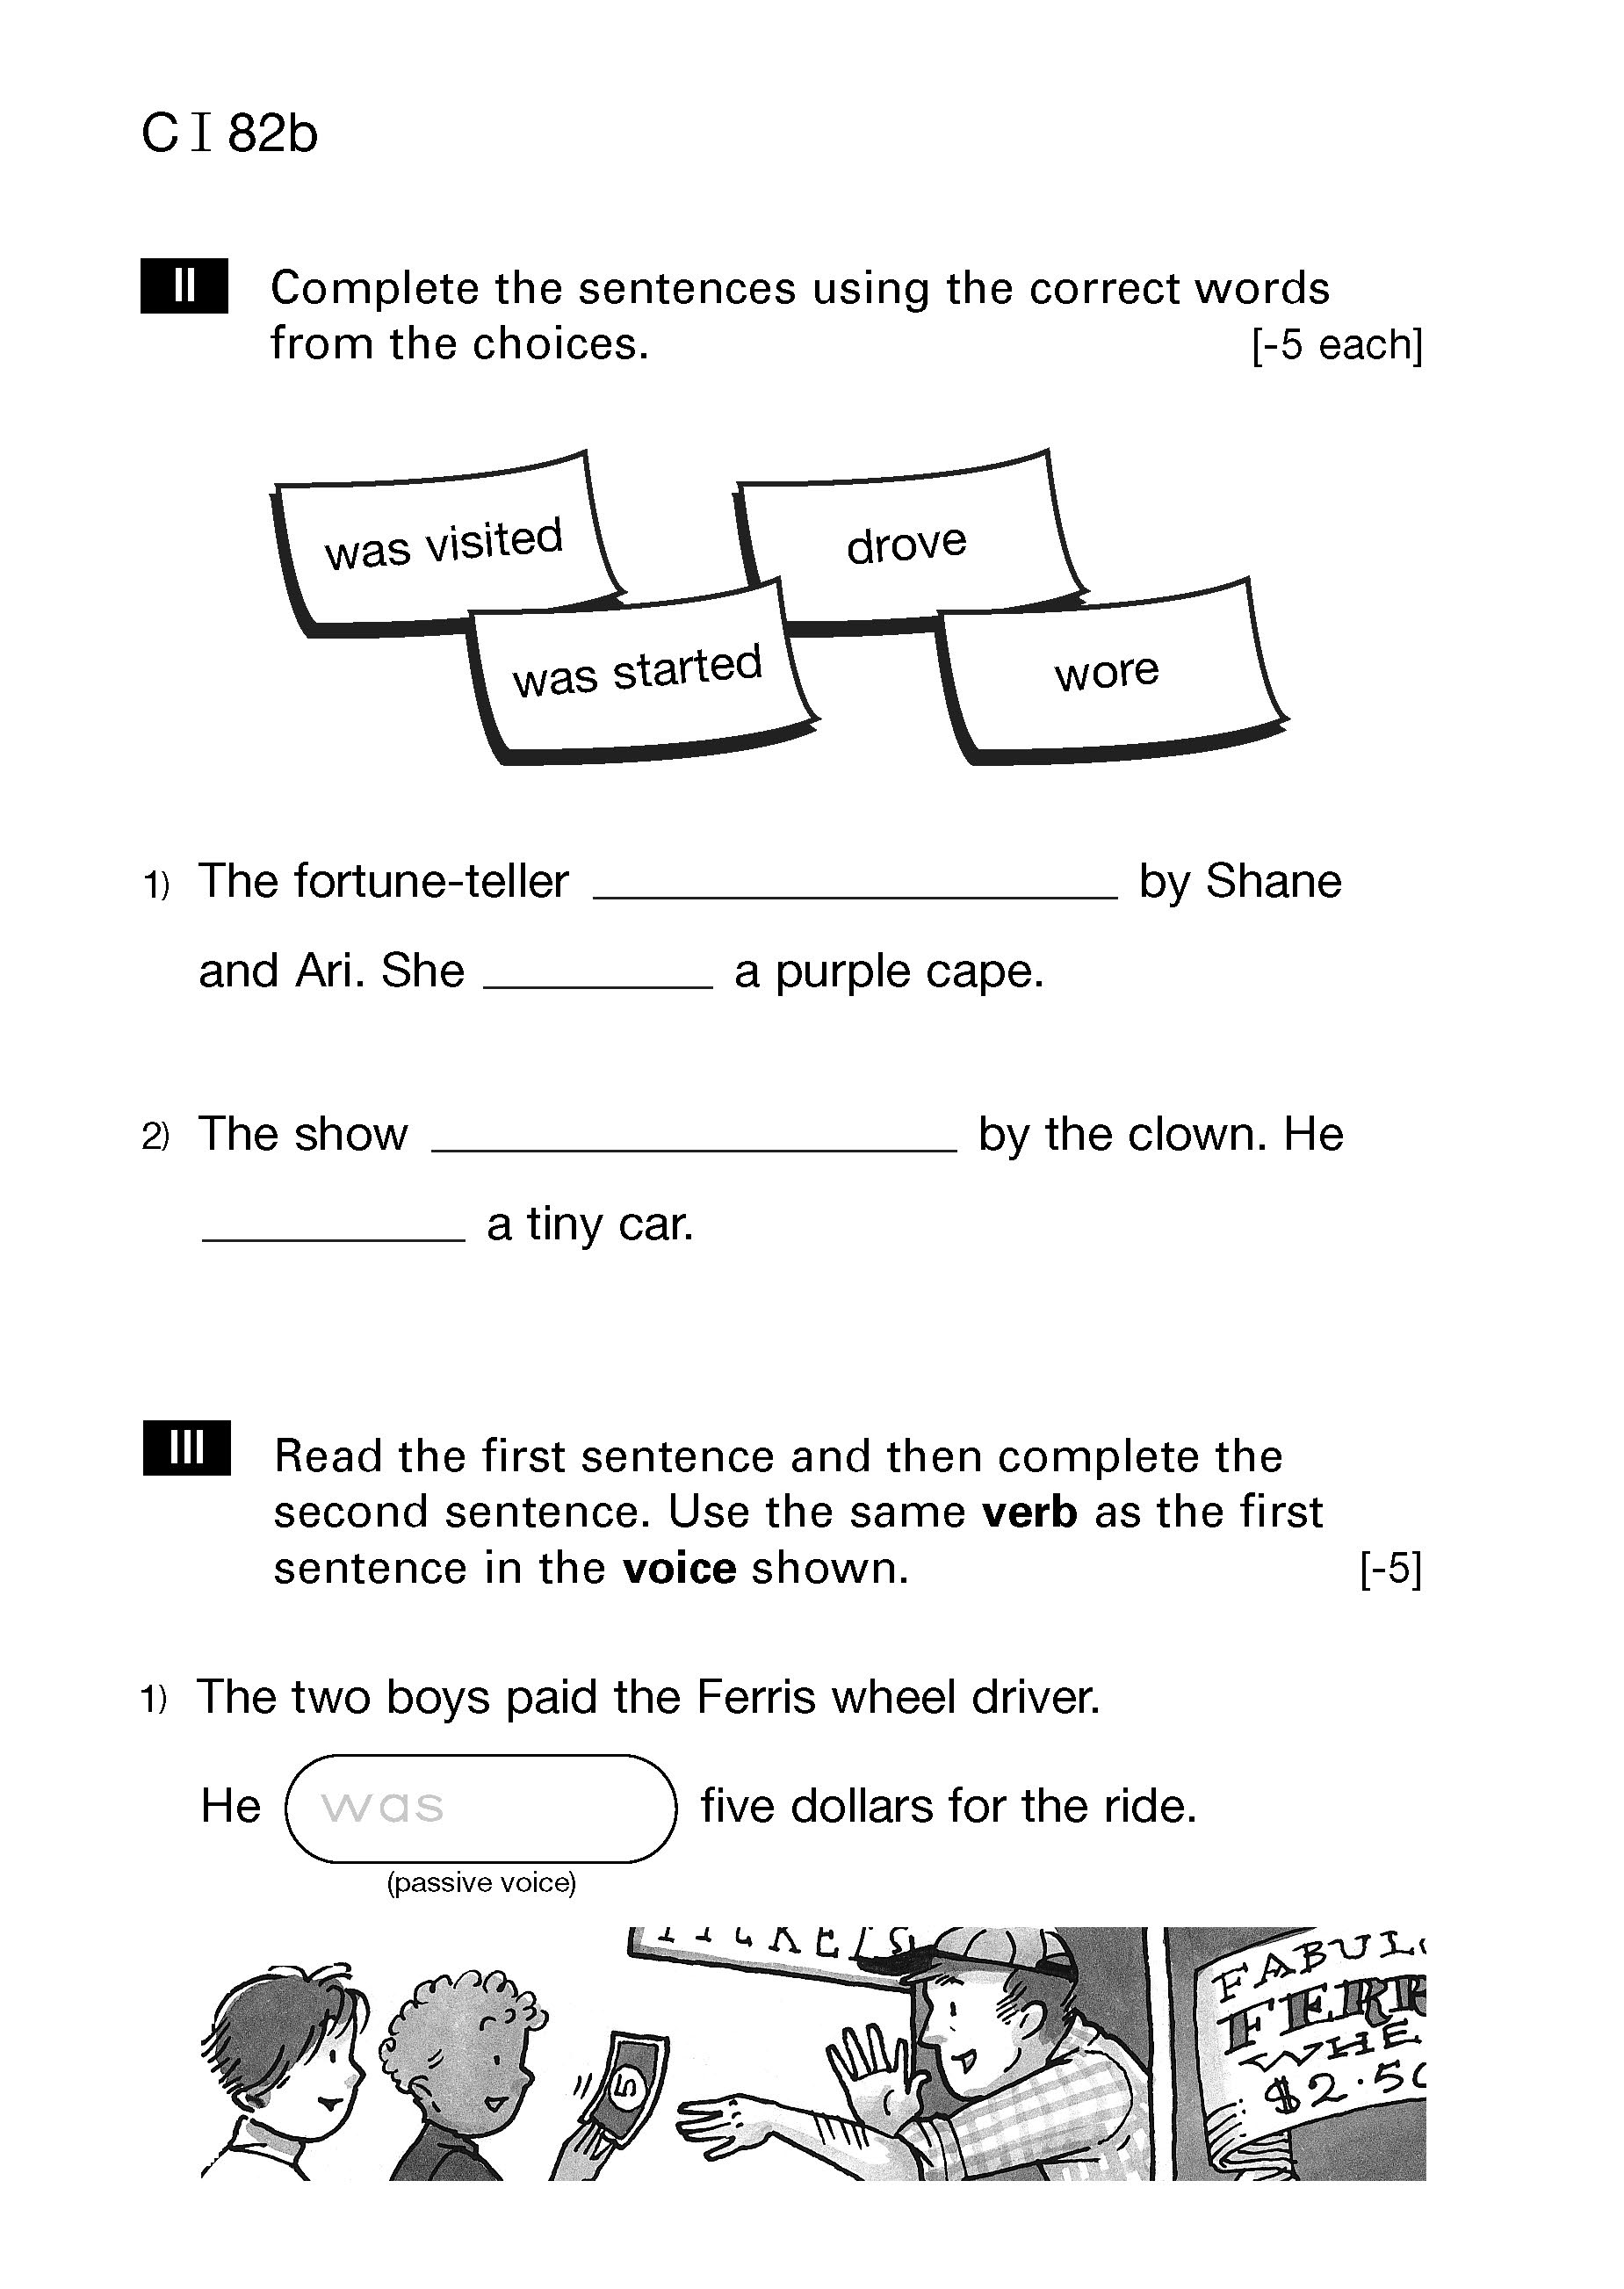 English Year 5 Interactive Worksheet Year 5 2021 Supporting Materials Based On The Main